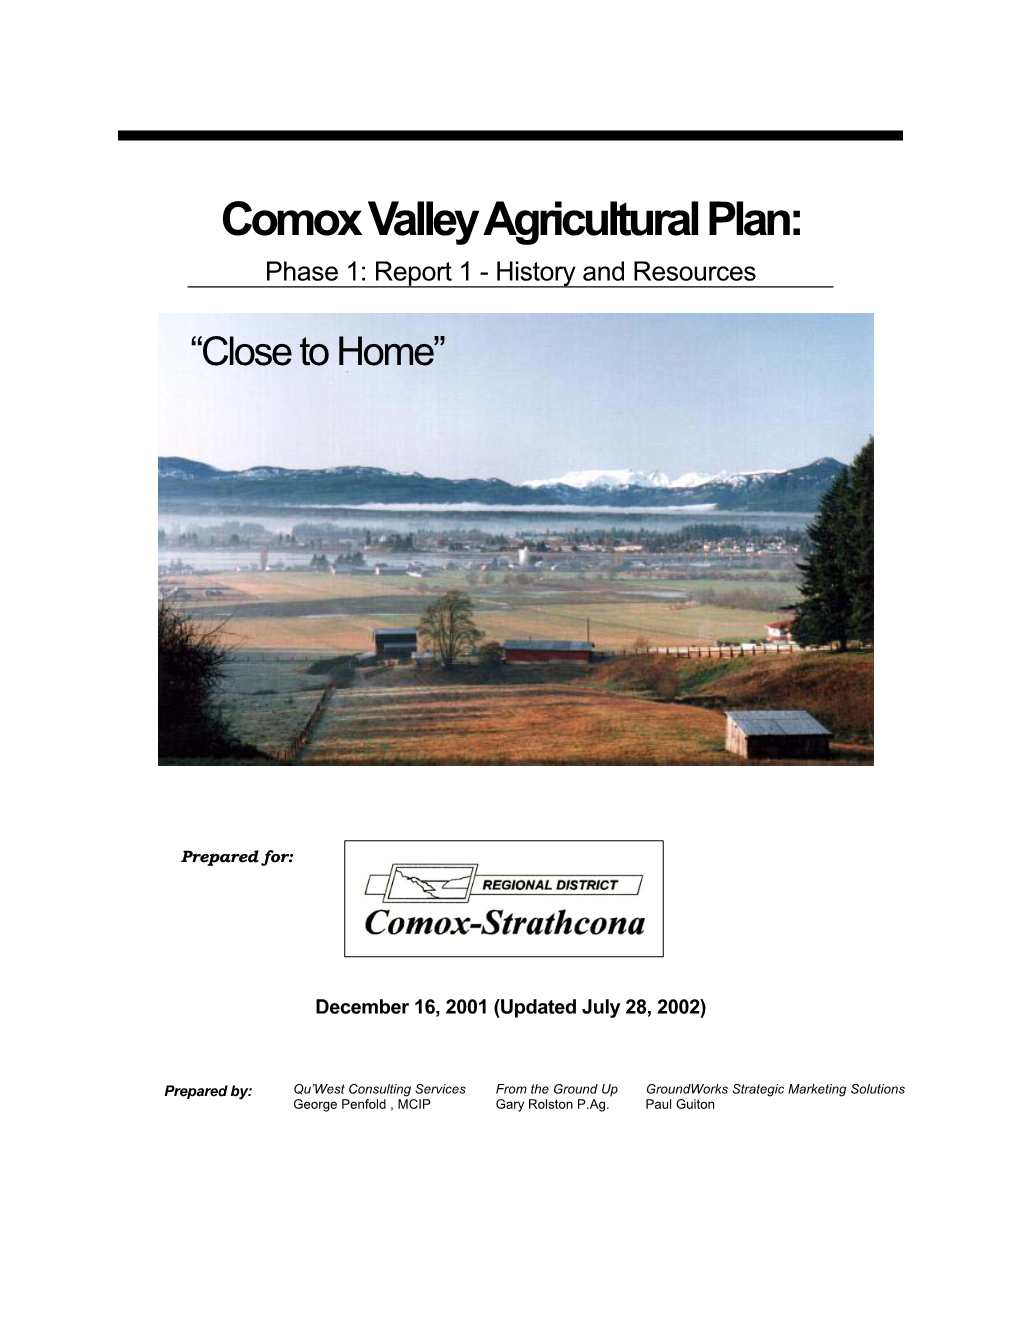 Comox Valley Agricultural Plan: Phase 1: Report 1 - History and Resources